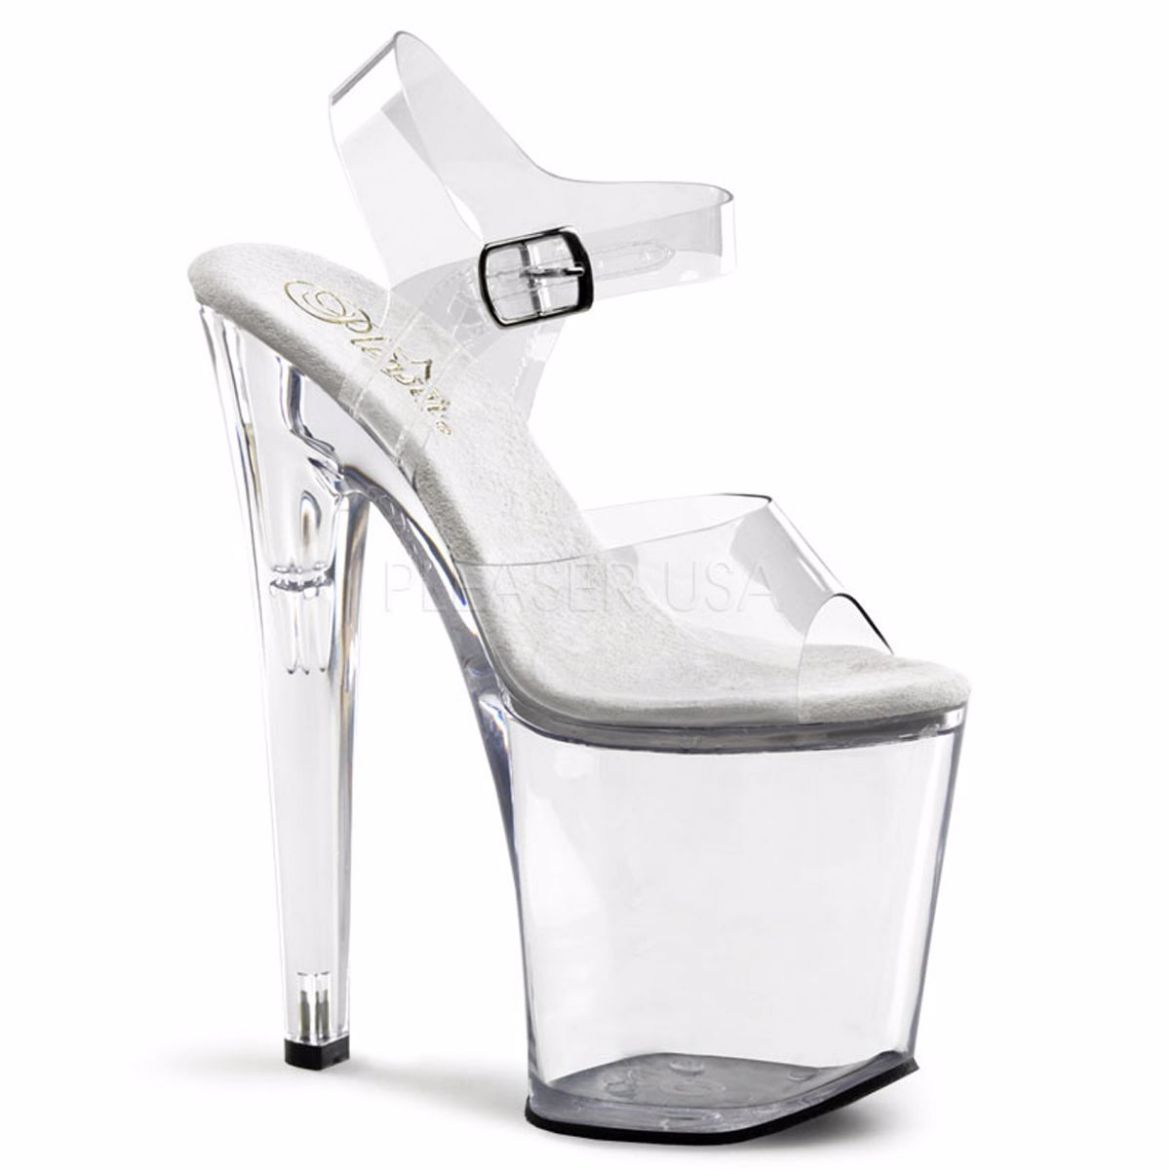 Product image of Pleaser Xtreme-808 Clear/Clear, 8 inch (20.3 cm) Heel, 4 inch (10.2 cm) Platform Sandal Shoes